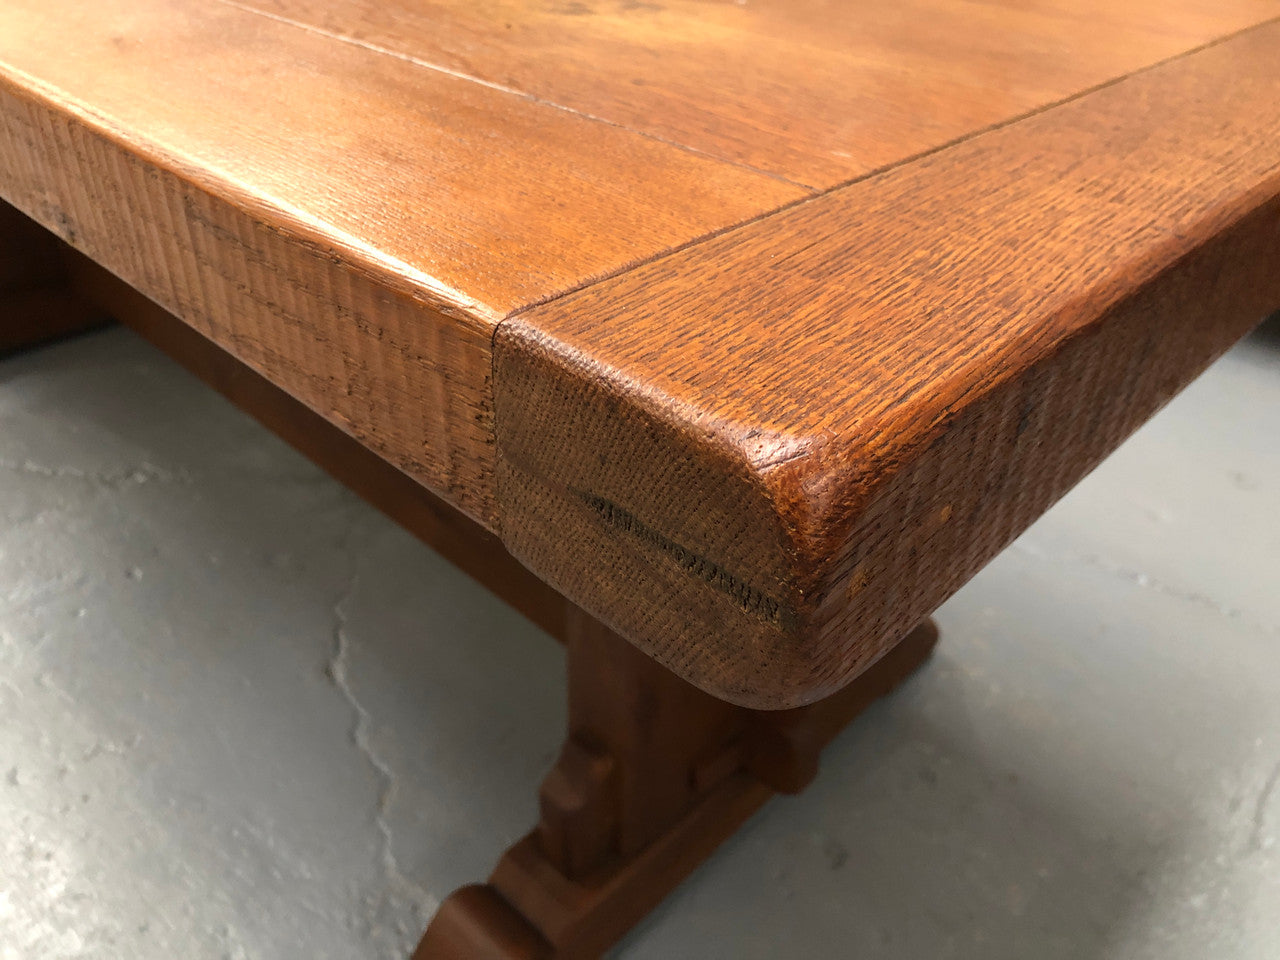 Lovely Oak French Farmhouse table with a thick plank top and lovely stretcher base. Can comfortable seat 8-10 people and is in good original detailed condition.